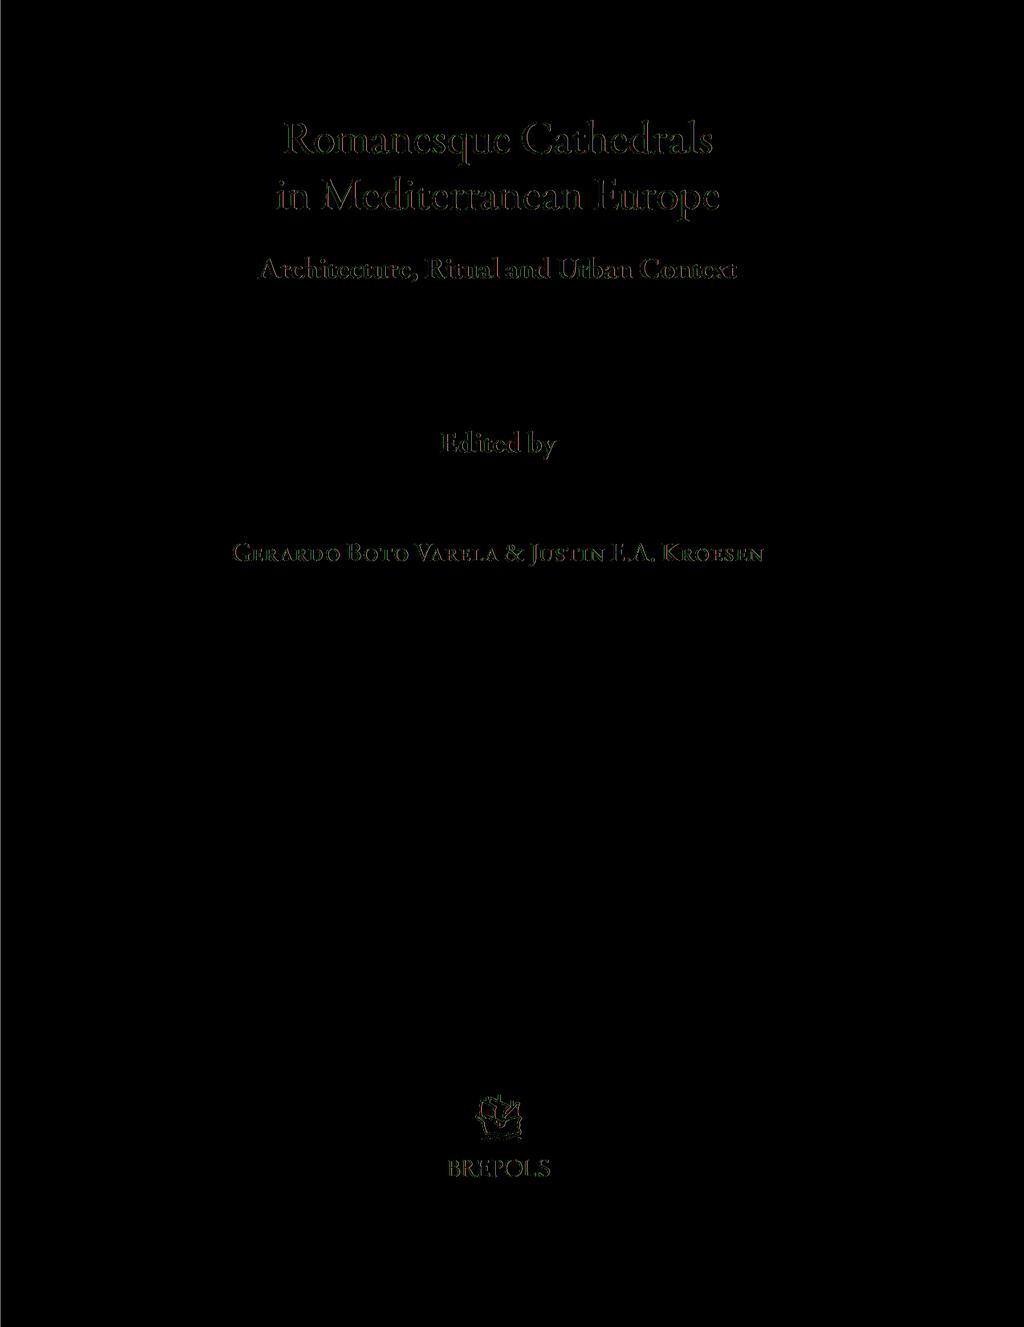 Romanesque Cathedrals in Mediterranean Europe Architecture, Ritual and